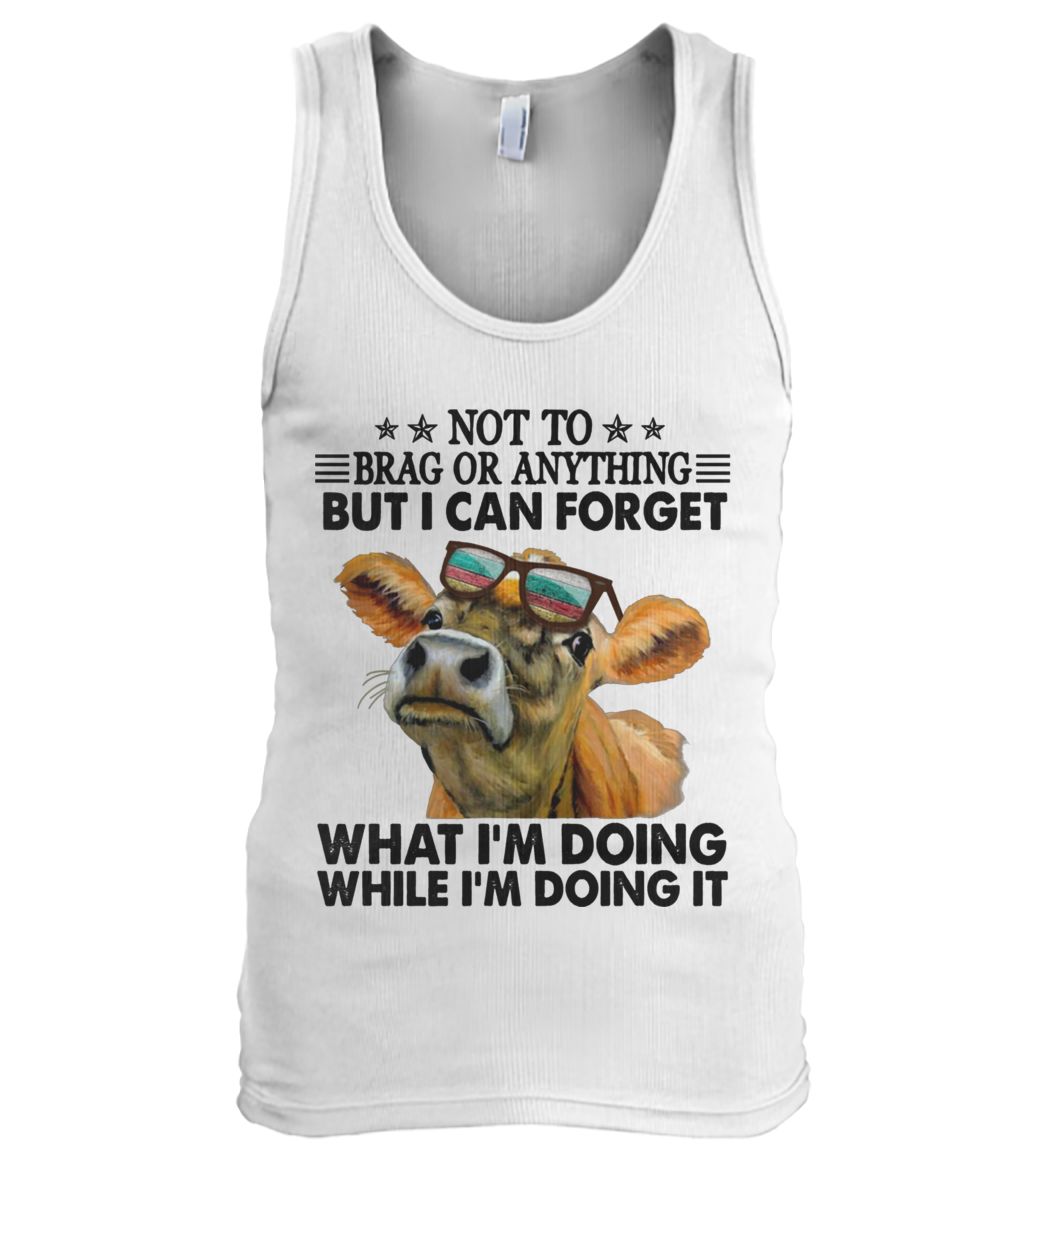 Not to brag or anything but I can forget what I'm doing while I'm doing it men's tank top